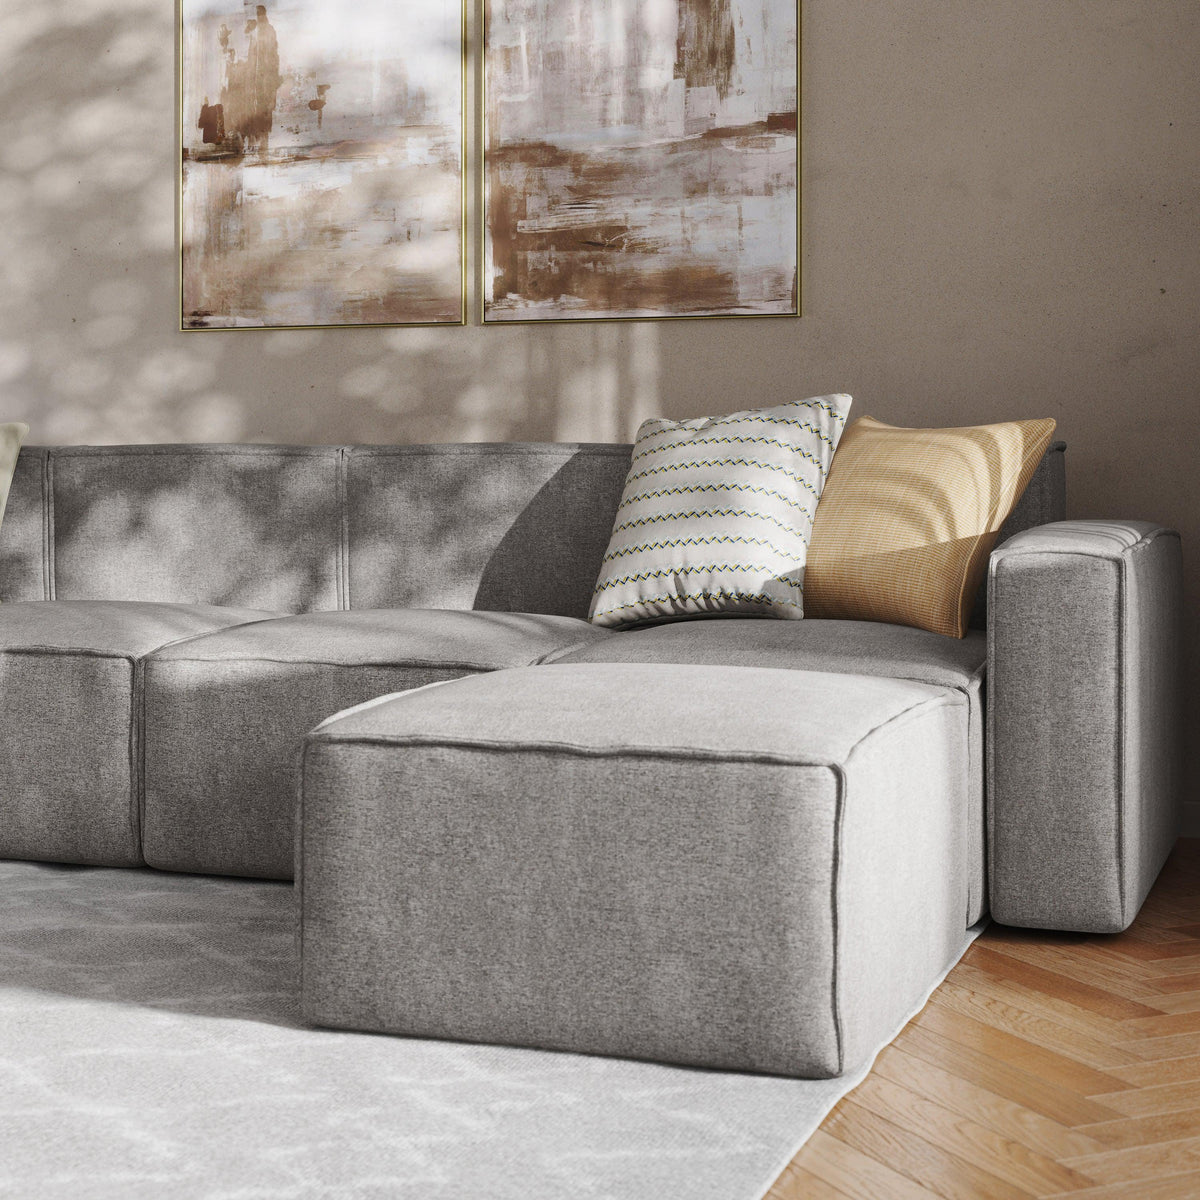 Gray |#| Contemporary 6 Piece Modular Sectional Sofa with 2 Ottomans in Gray Fabric